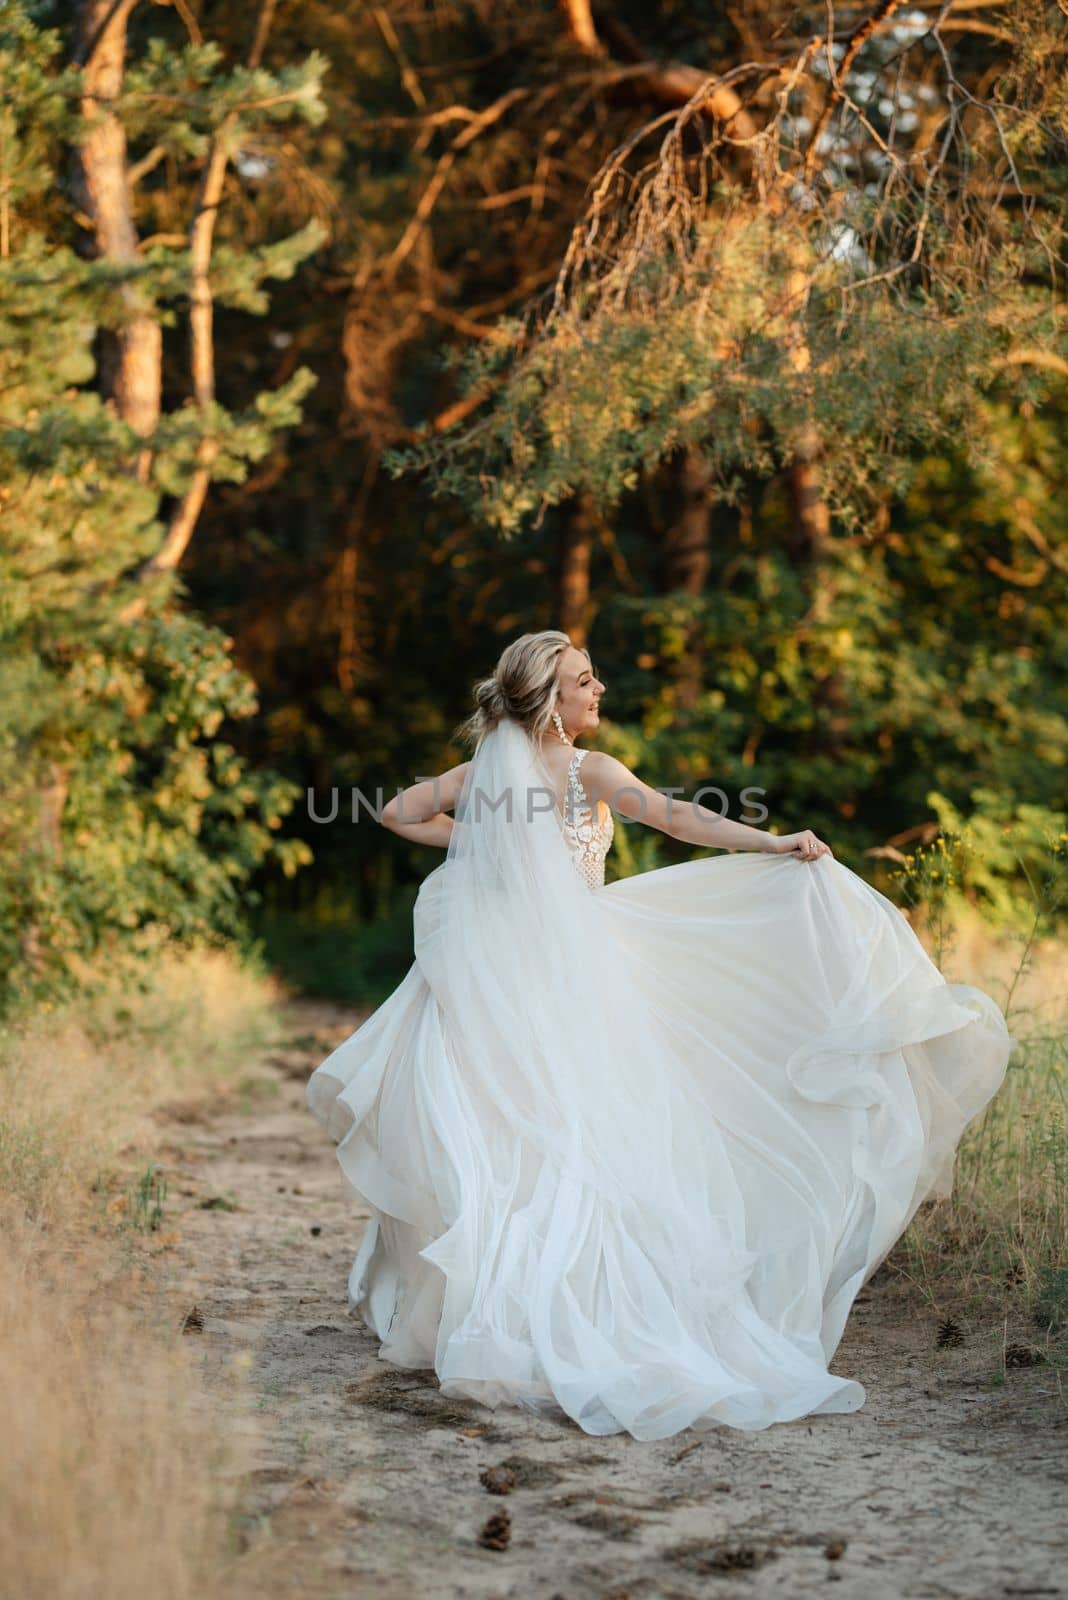 bride blonde girl with a bouquet in the forest by Andreua